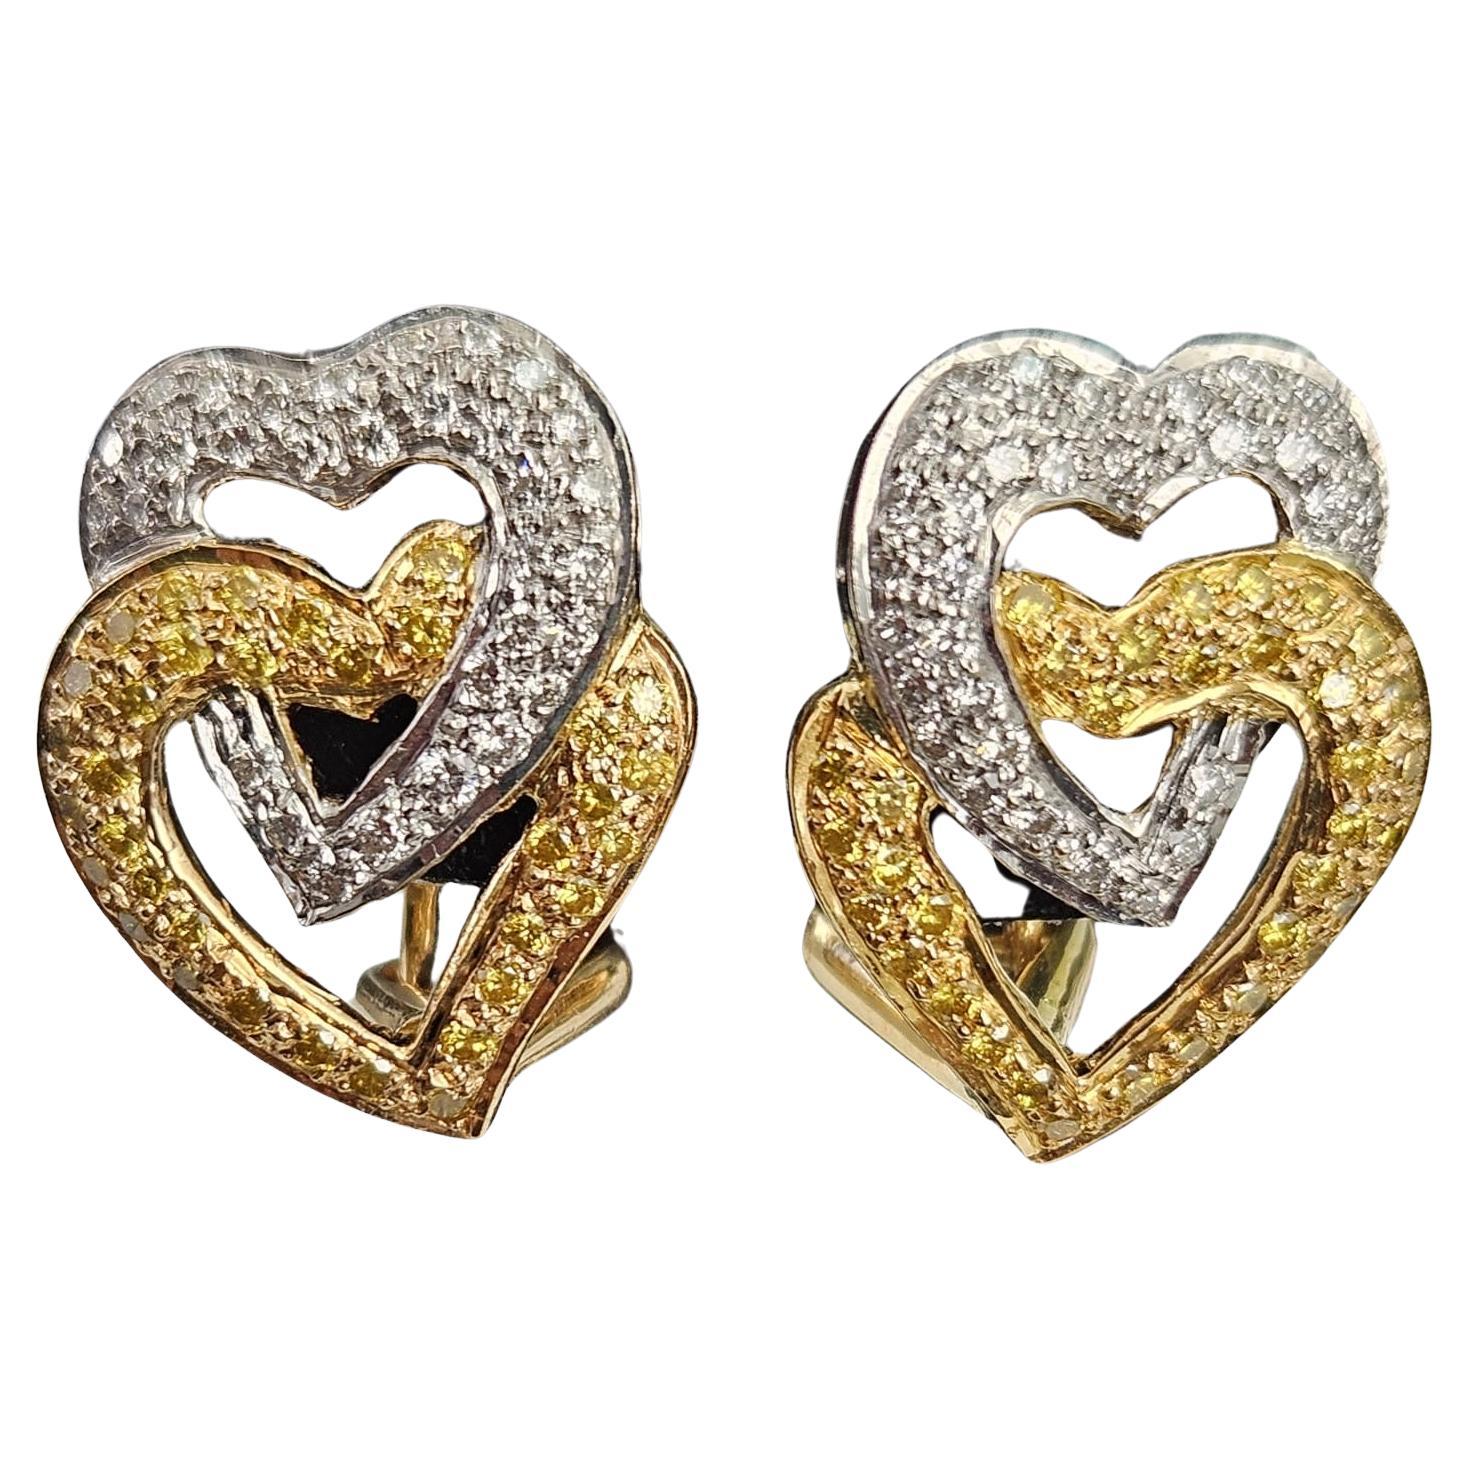 0.94 cts Canary and White Diamond Heart Earrings